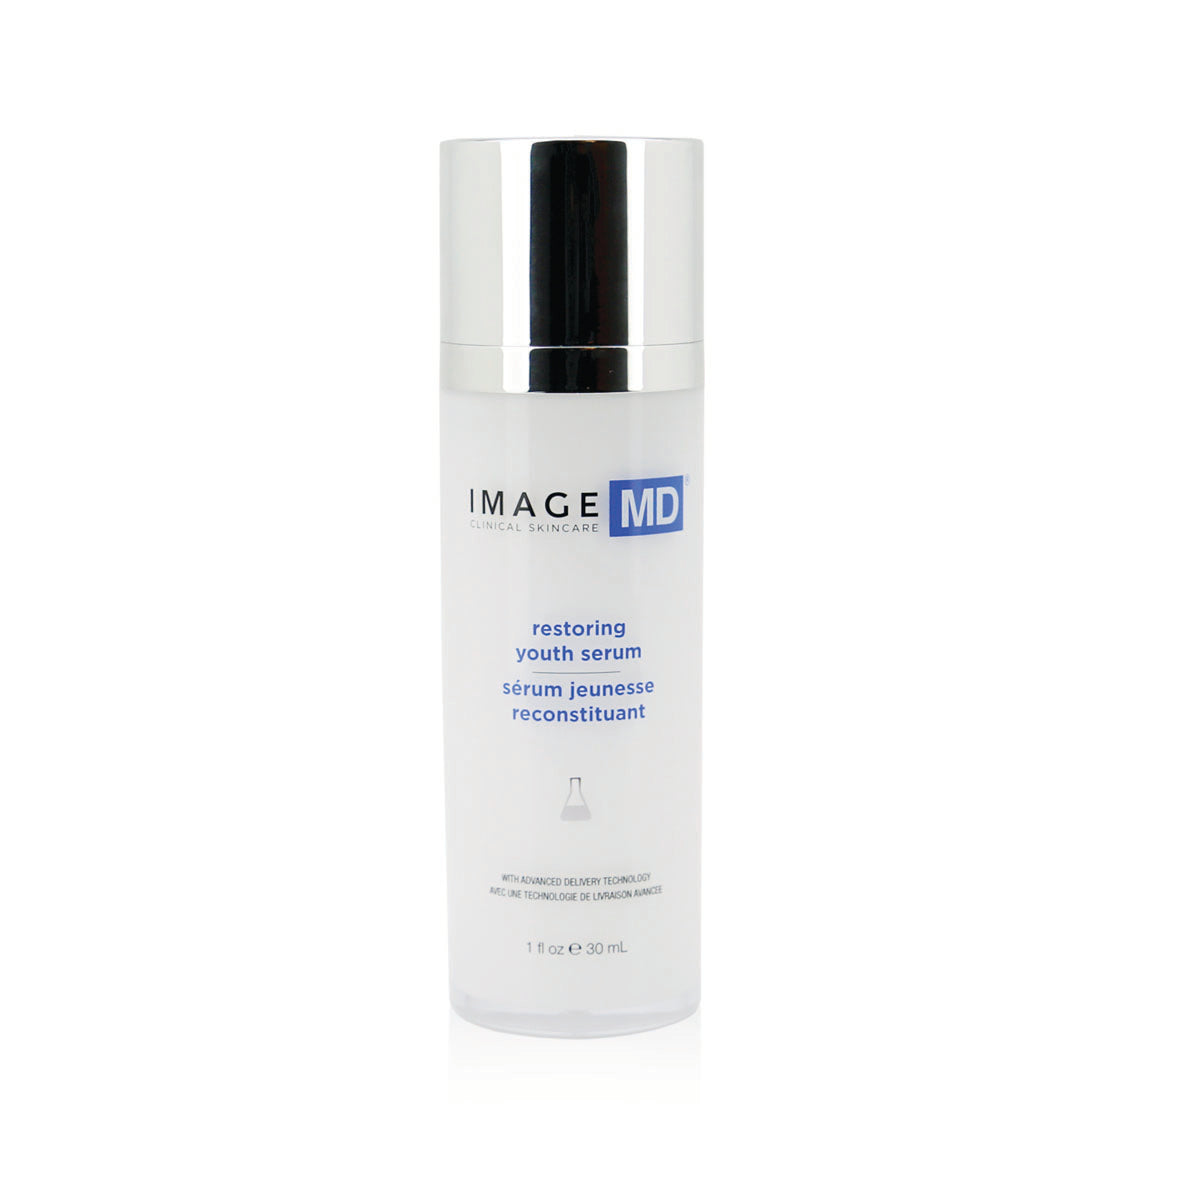 Image MD Restoring Youth Serum with ADT Technology